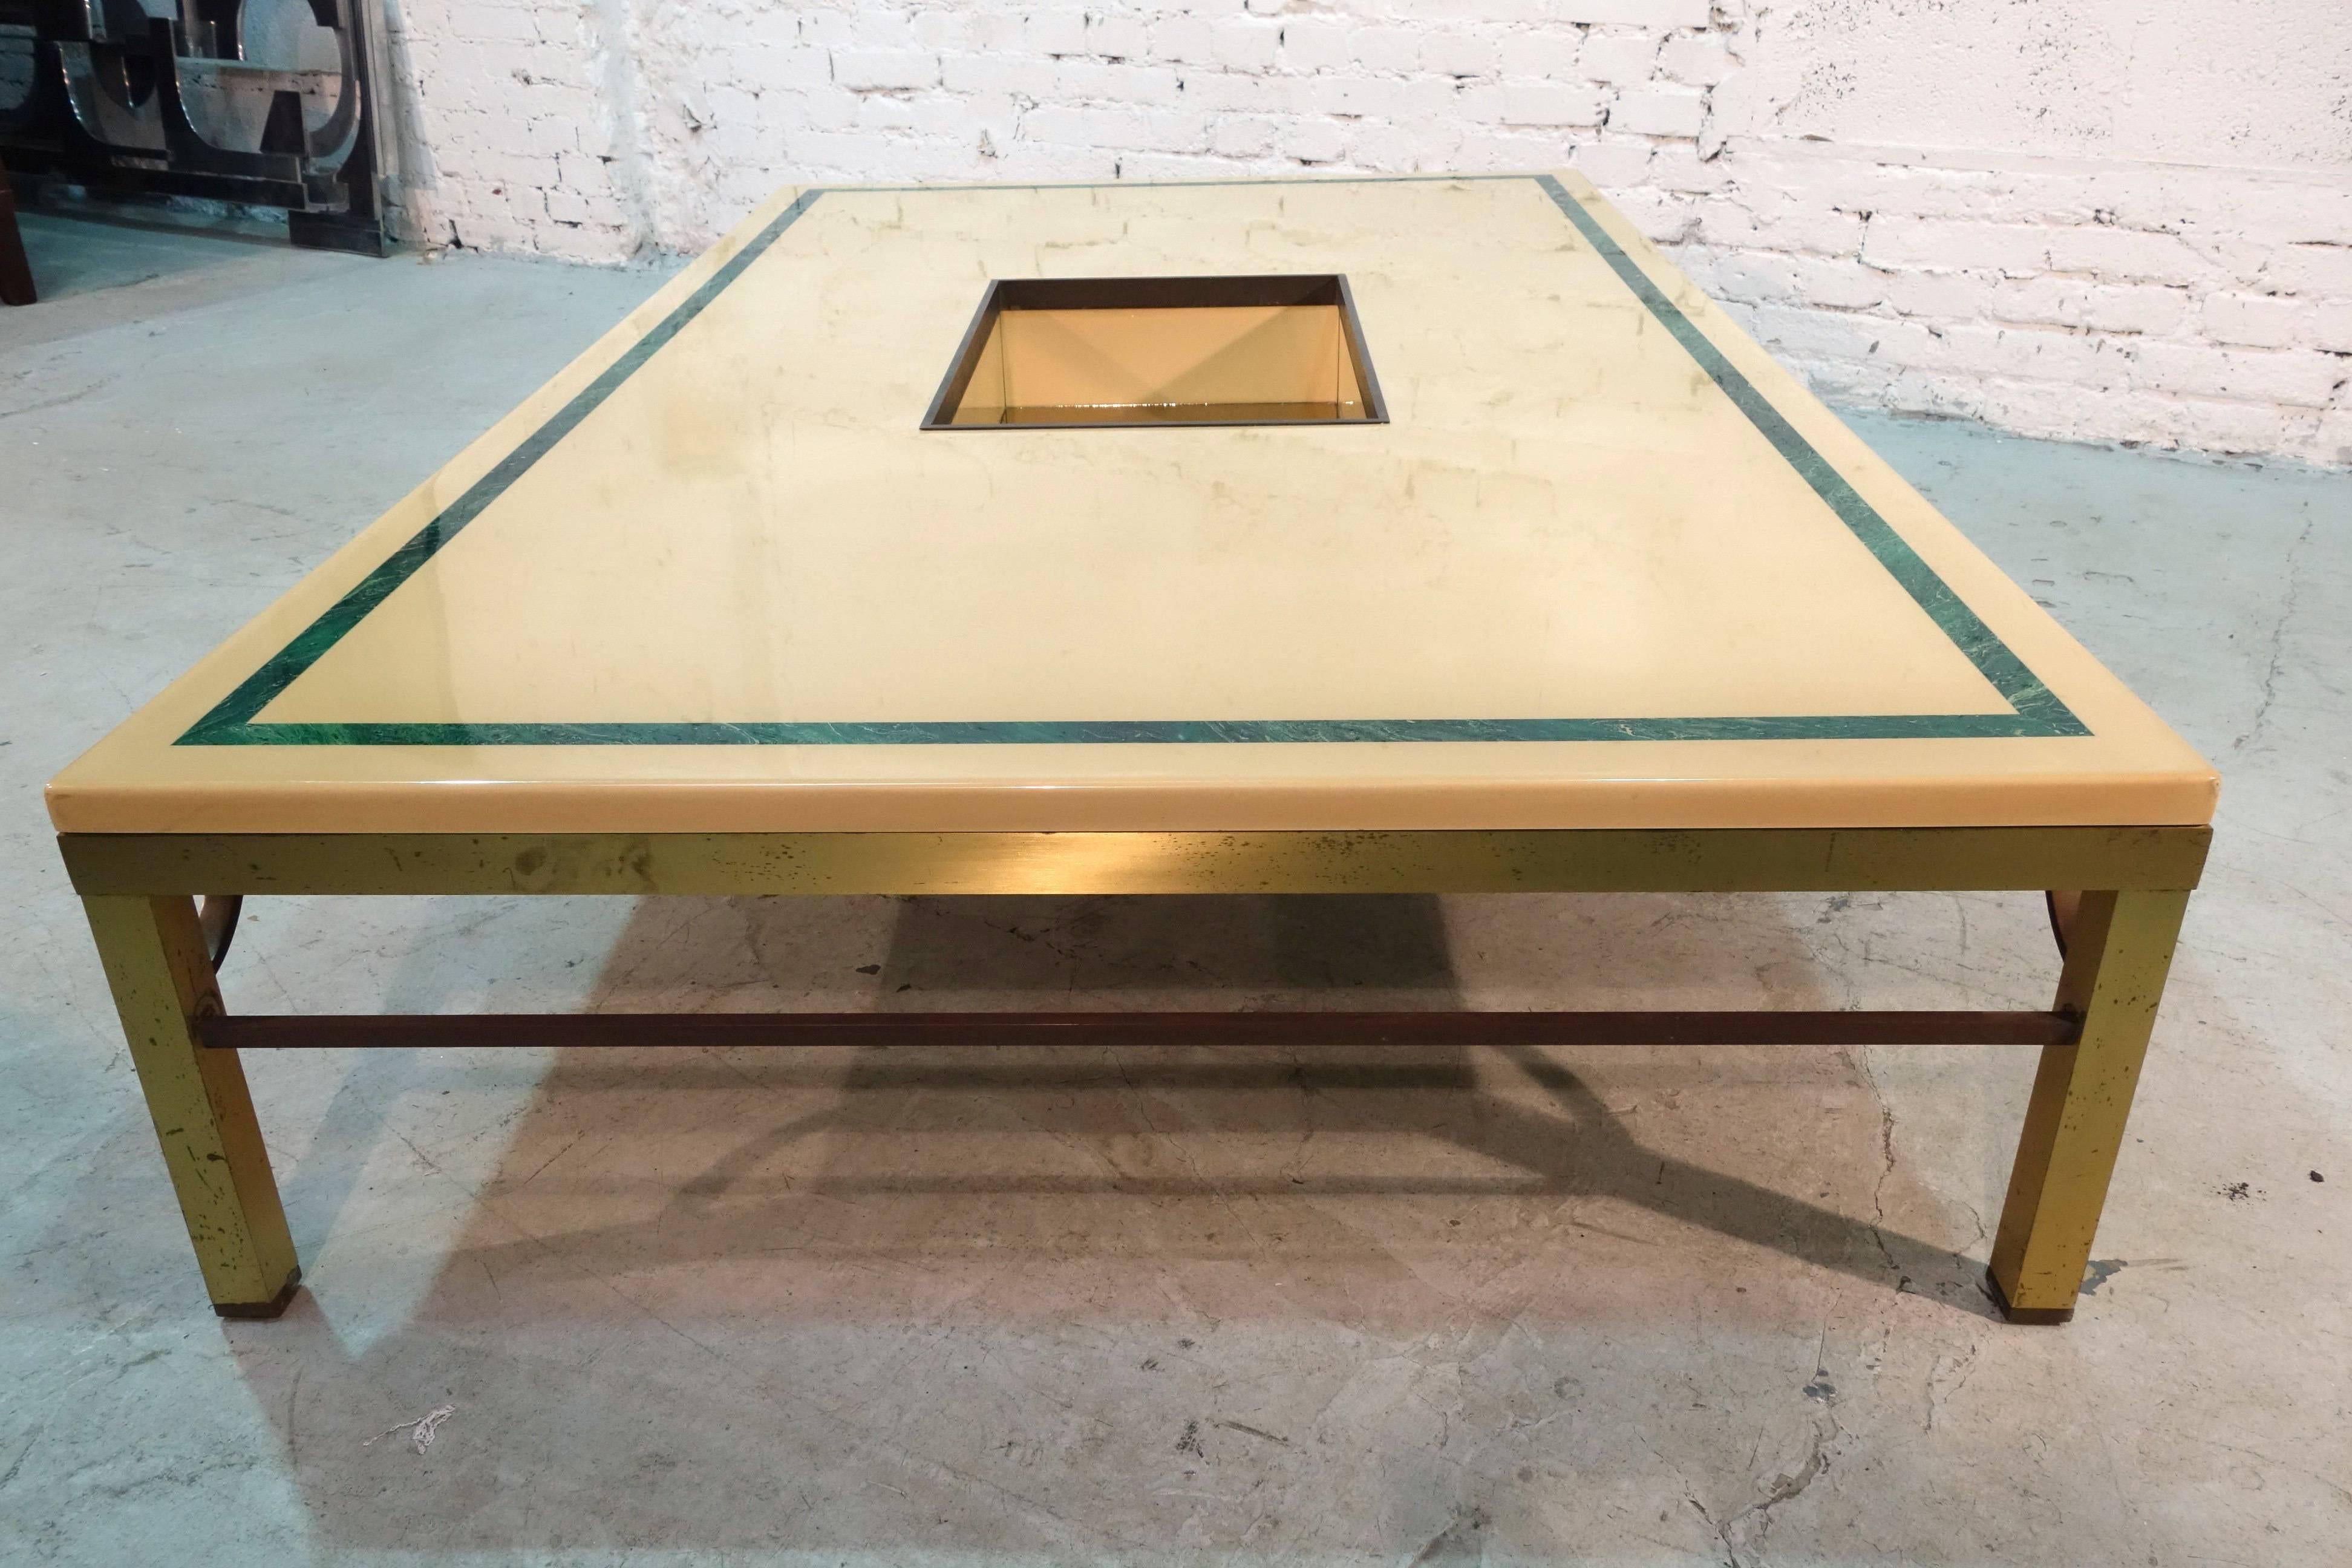 Huge bar center table attributed to Romeo Rega in white lacquer.
Base in brass.